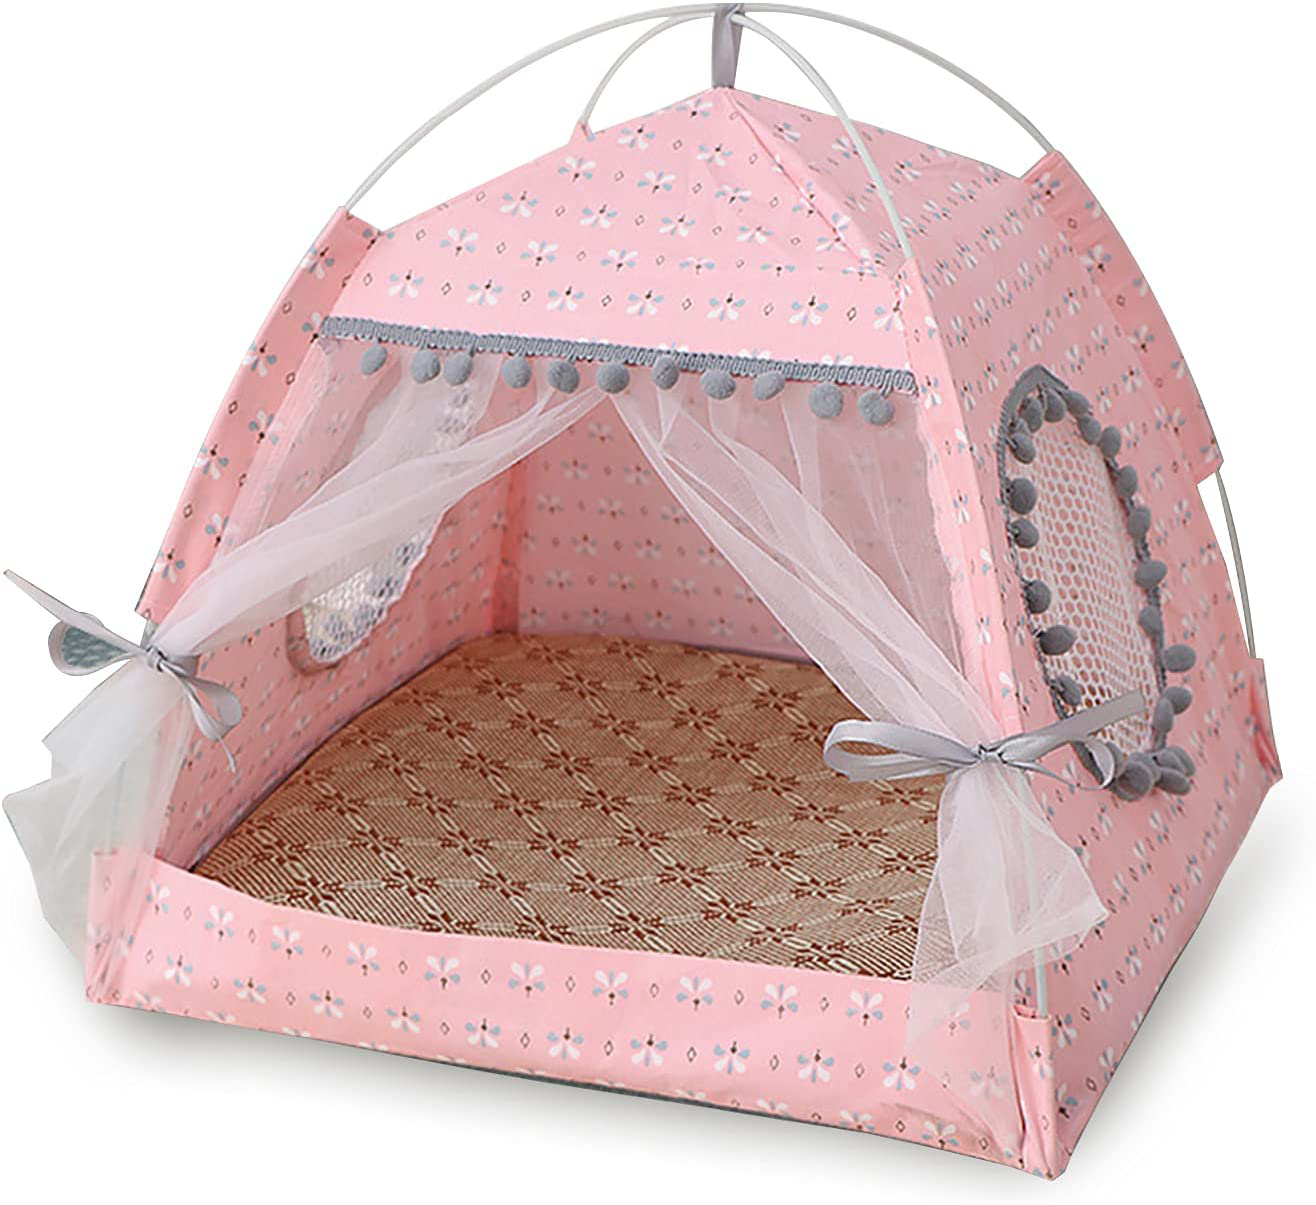 Gigreinc Cat Princess Indoor Tent House Pet Dog Cute Floral Cave Nest Bed Portable Dog Tents (M:38X38X36Cm/15X15X14Inch, Floral Pink) Animals & Pet Supplies > Pet Supplies > Dog Supplies > Dog Houses Gigreinc   